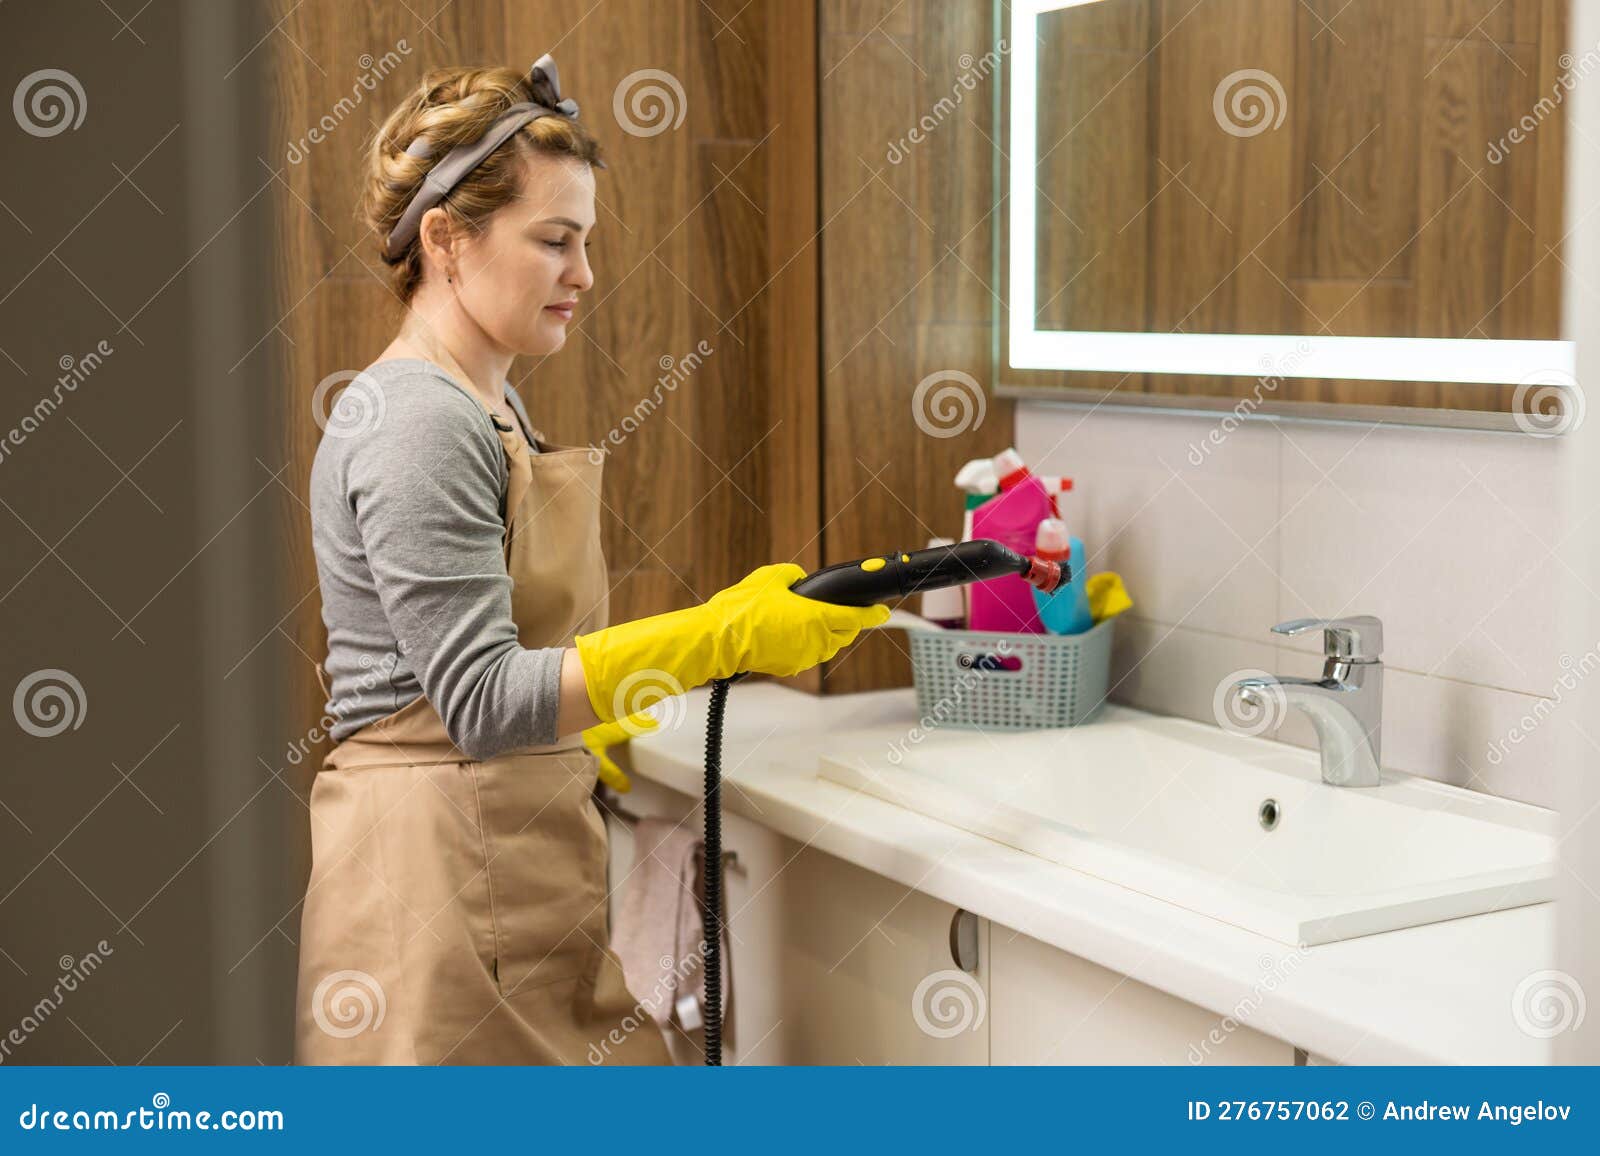 Wet Cleaning the Bathroom with a Steam Cleaner Stock Photo - Image of ...